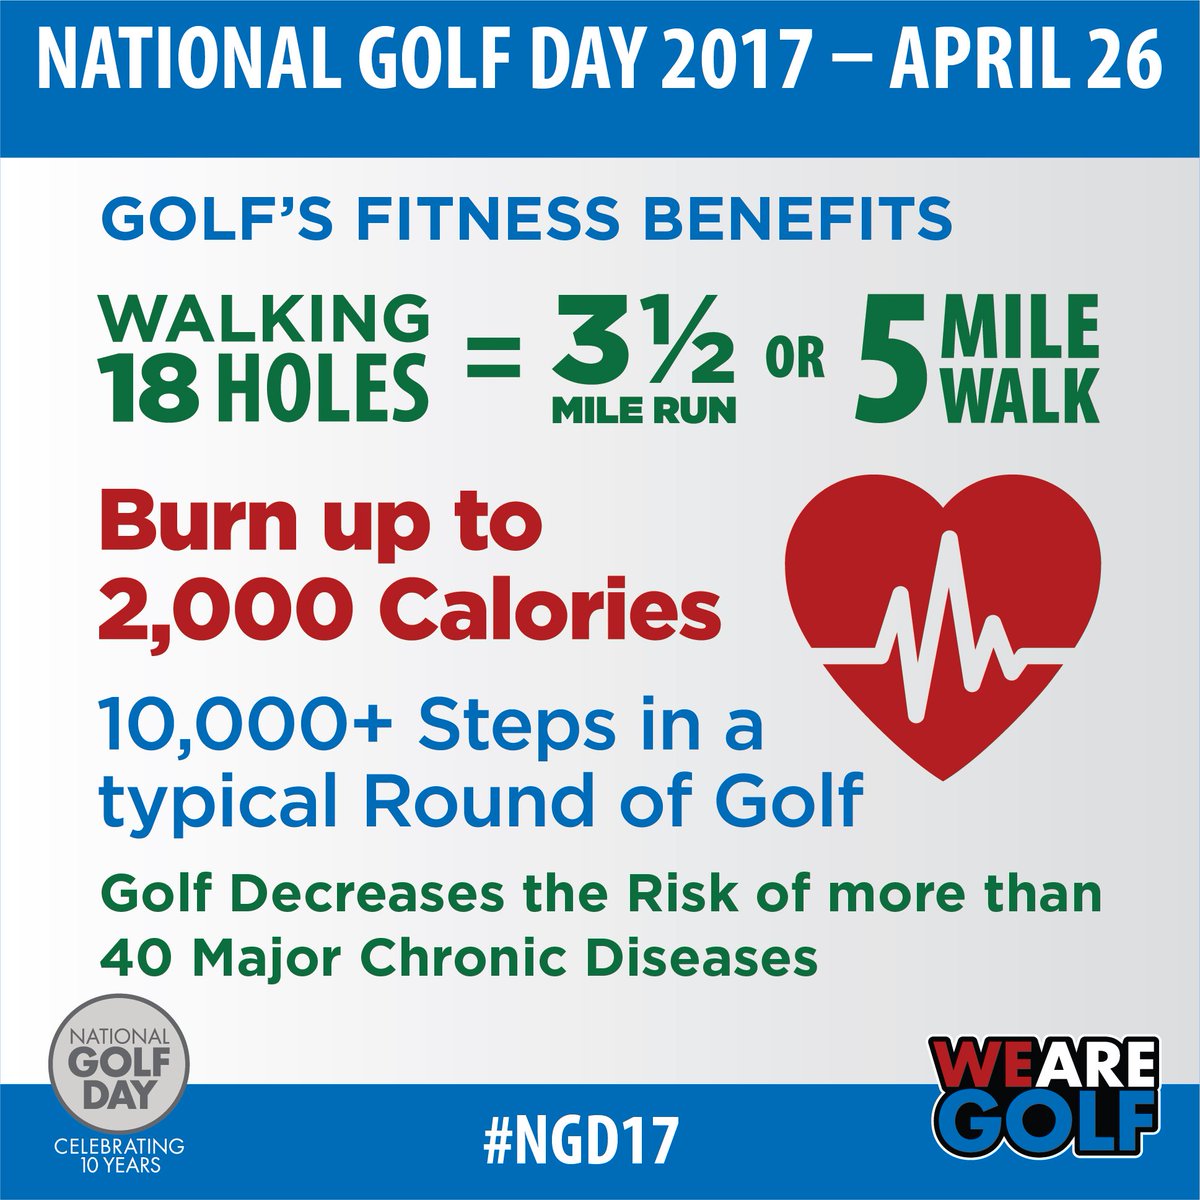 LPGA on X: "Walking 18 holes can burn up to 2K calories. Are you playing  today? https://t.co/dMahZK4cbY #GetFit #NGD17 @wearegolf  https://t.co/UFVHpOAP45" / X